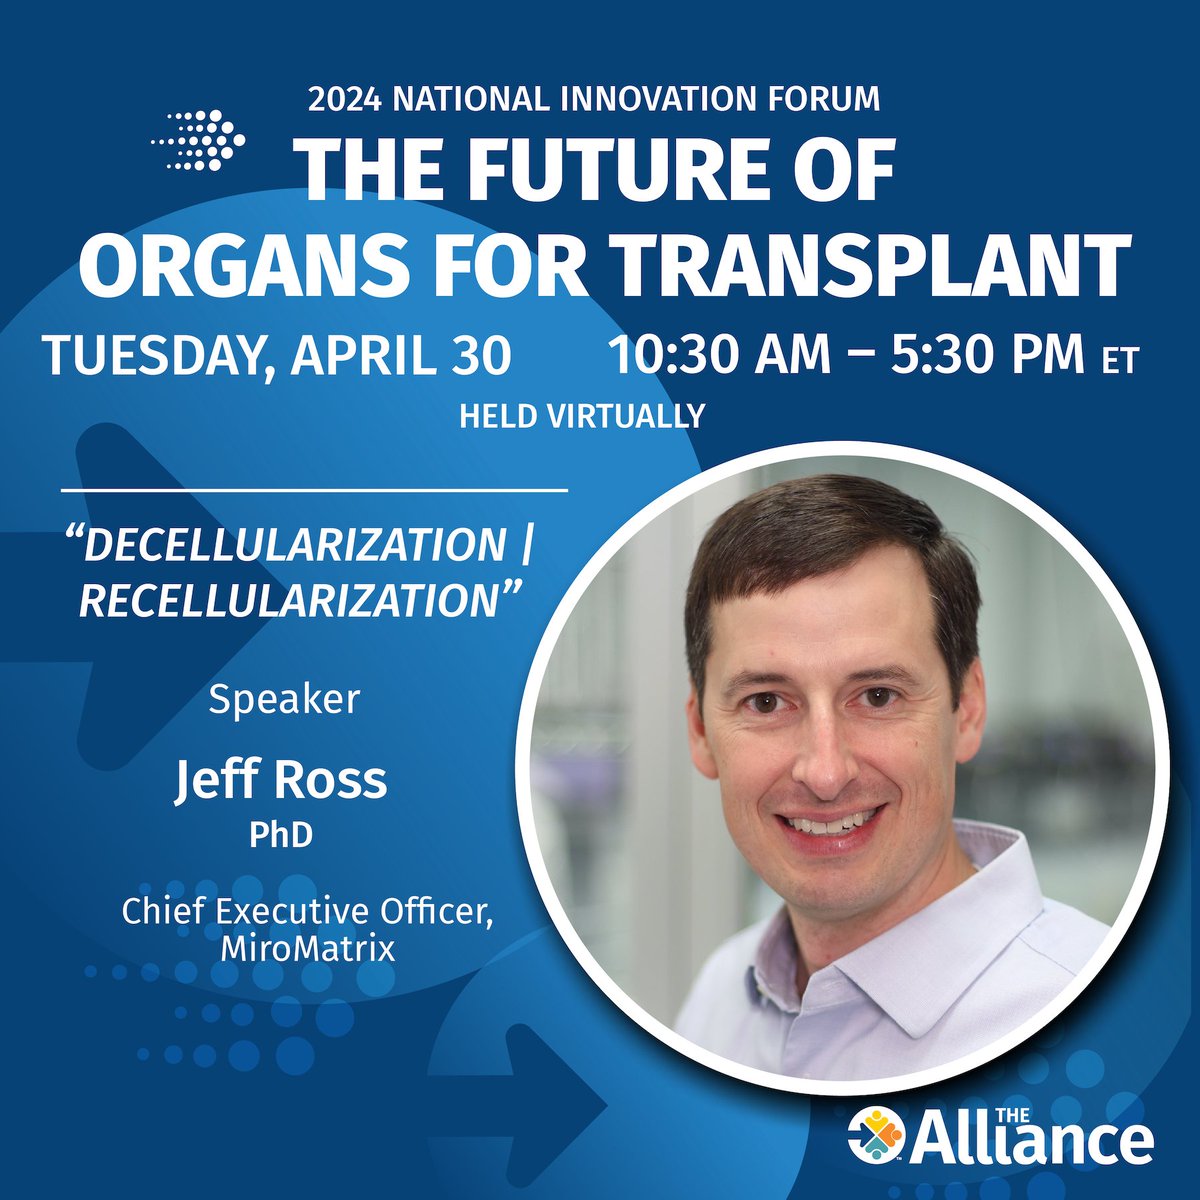 Join our virtual National Innovation Forum on April 30 to hear from renowned experts like Dr. Jeff Ross, CEO of Miromatrix, as he discusses the latest in #Decellularization and #Recellularization of organs and tissues. Register now: bit.ly/3vRPp3d